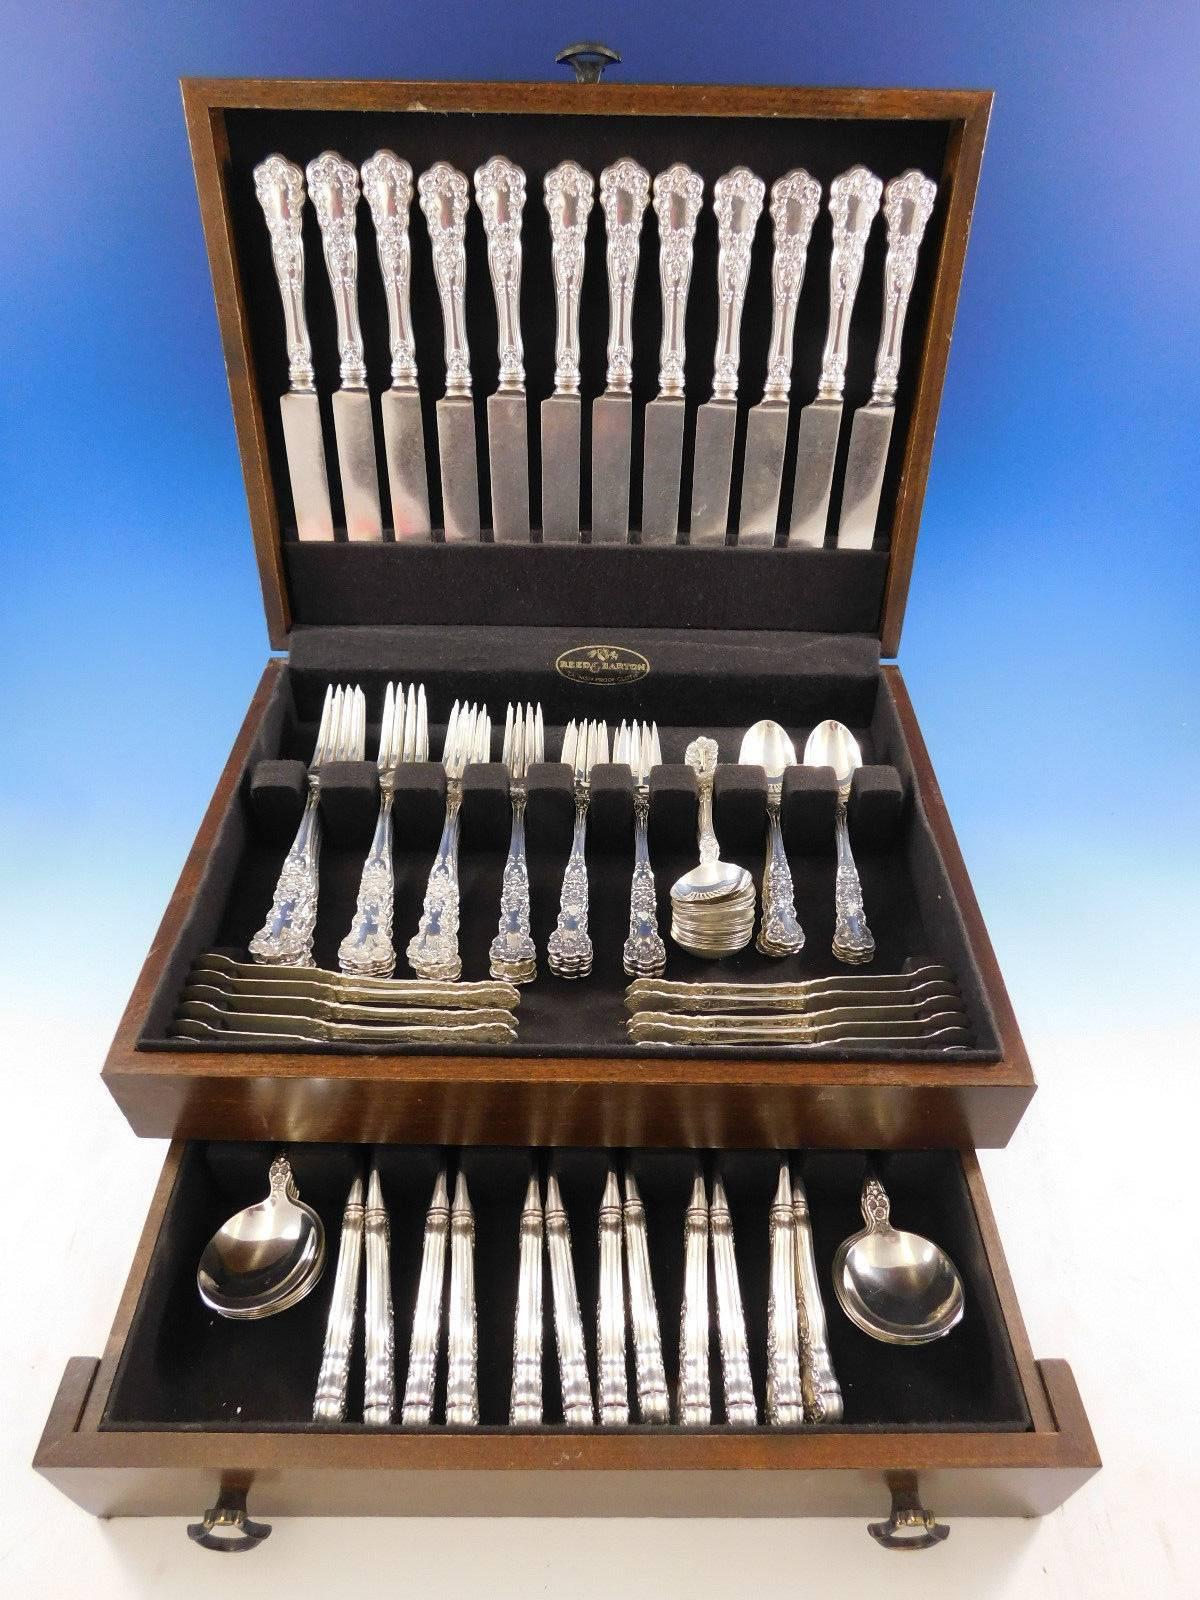 Outstanding Buttercup by Gorham sterling silver flatware set, 108 pieces. This set includes: 

12 dinner size knives, blunt, 9 3/4